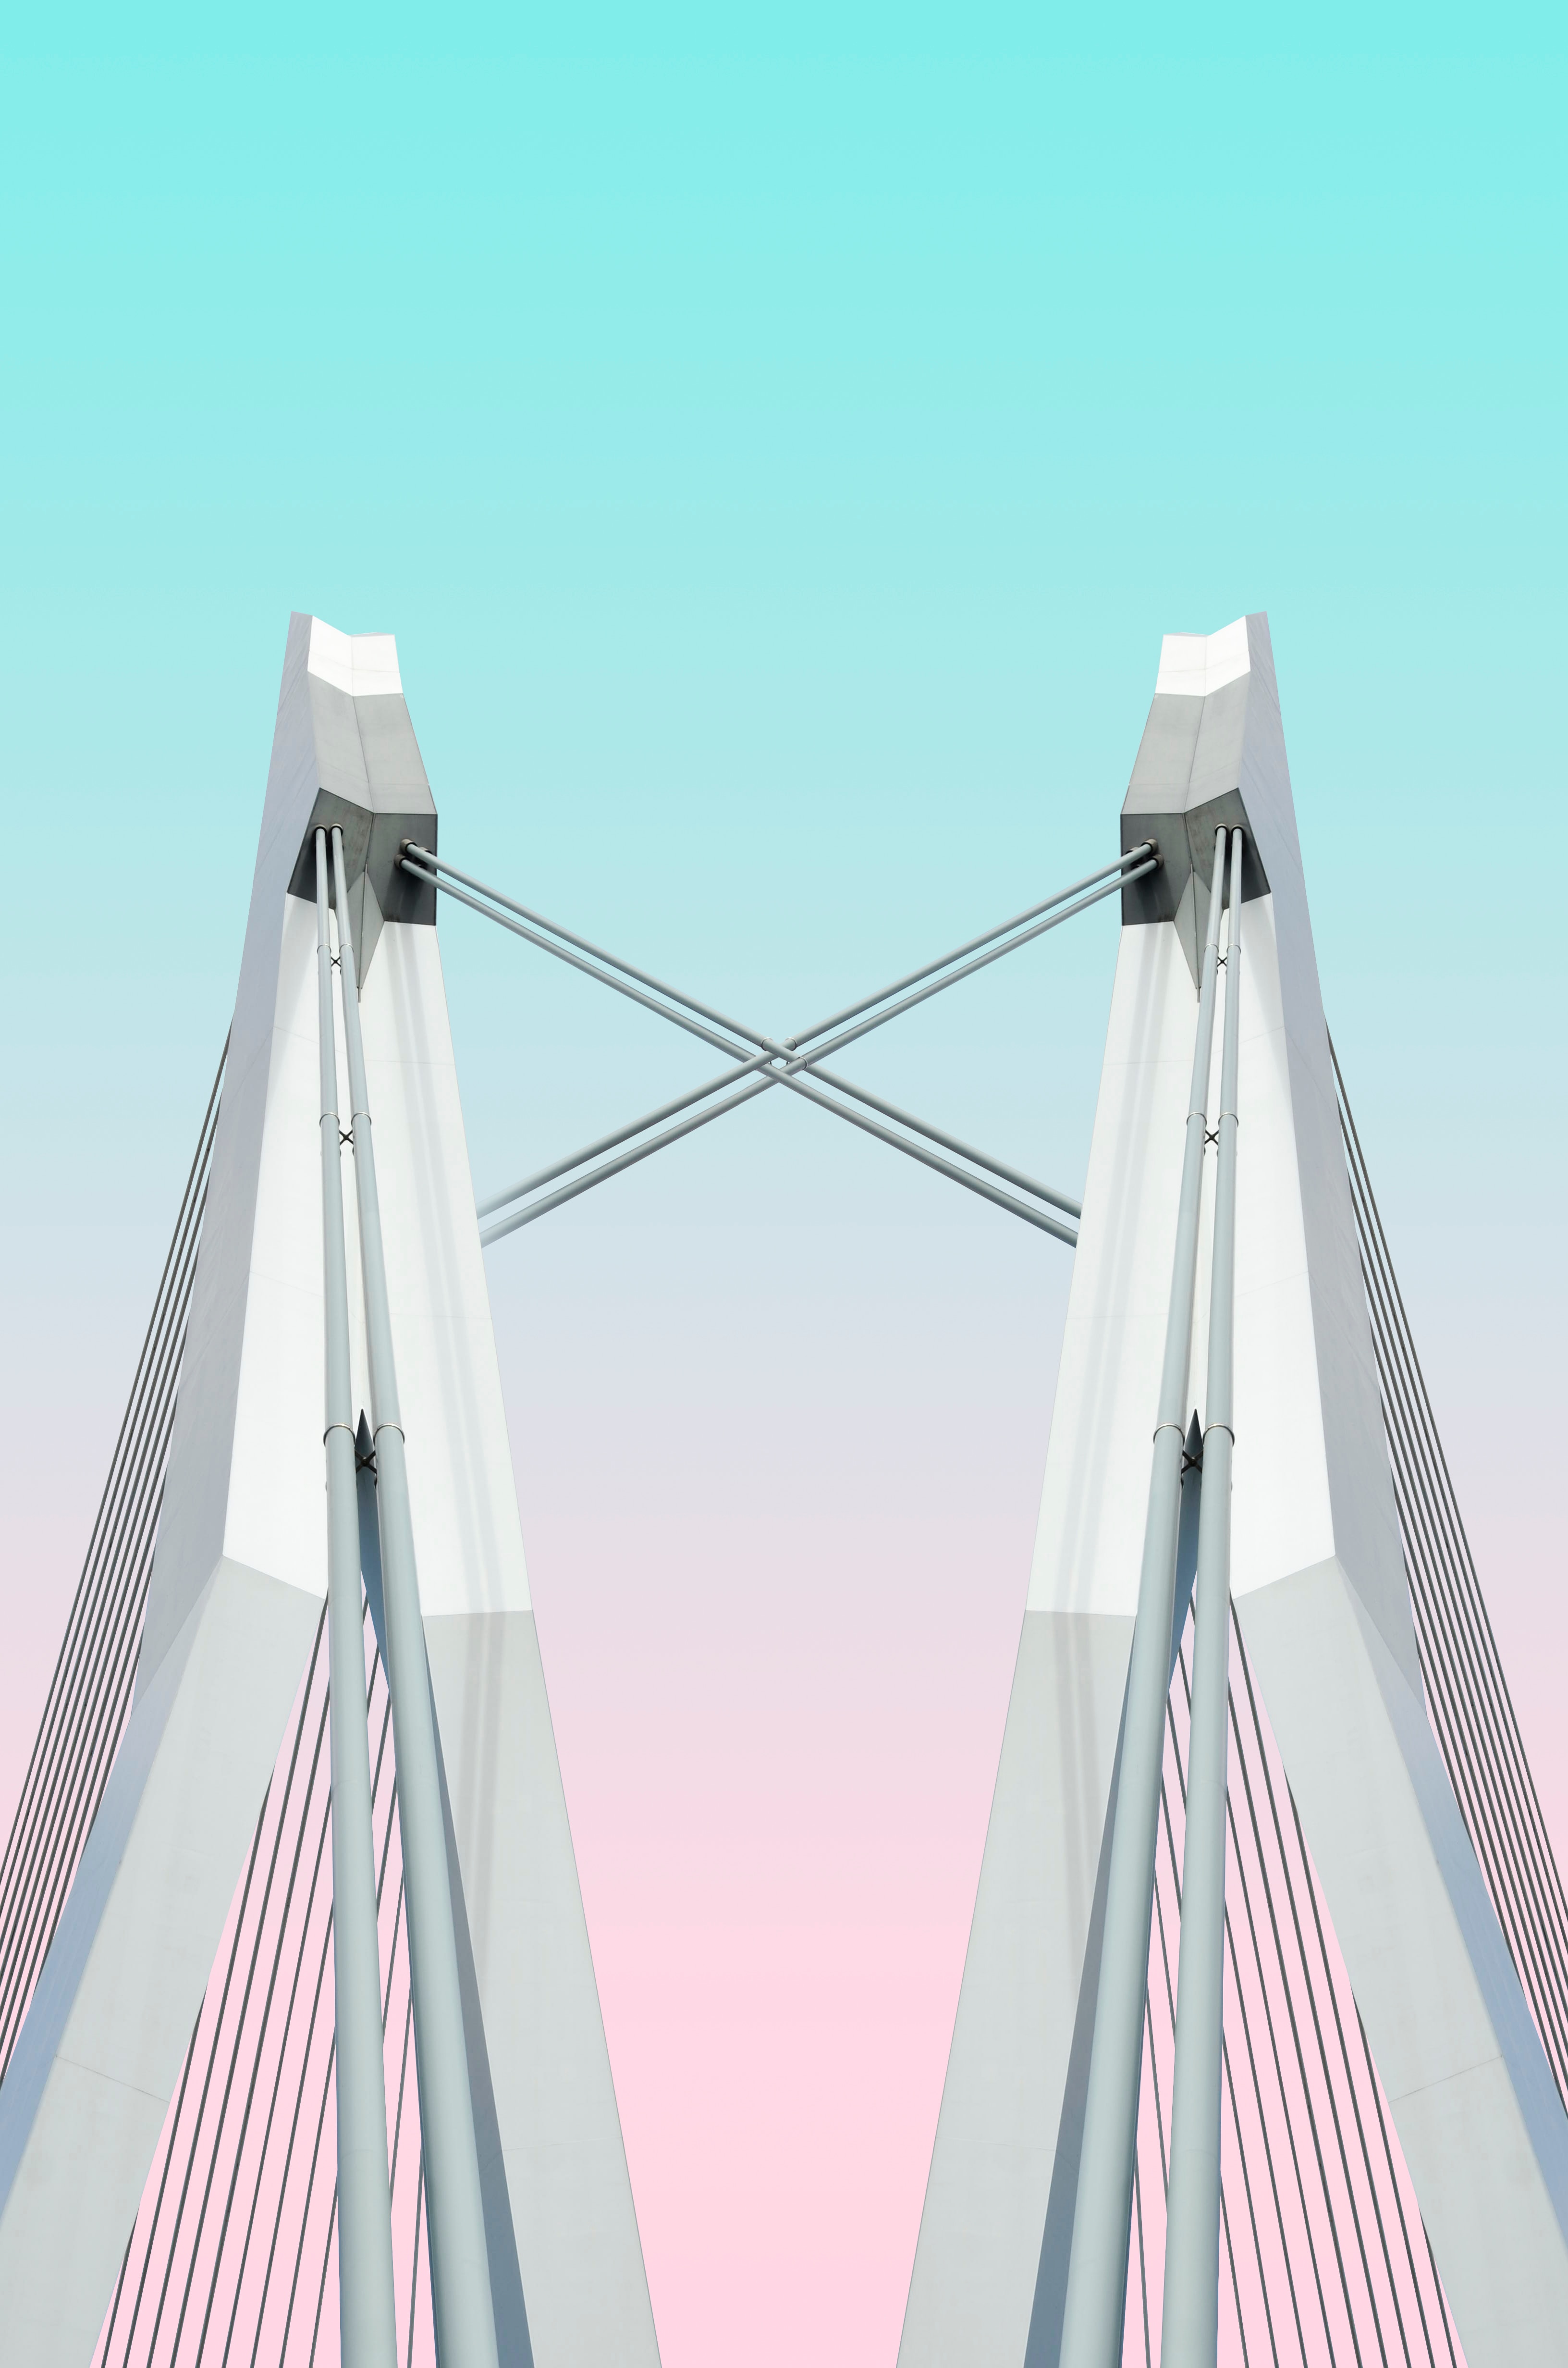 construction, architecture, minimalism, bridge, design, symmetry, support wallpapers for tablet